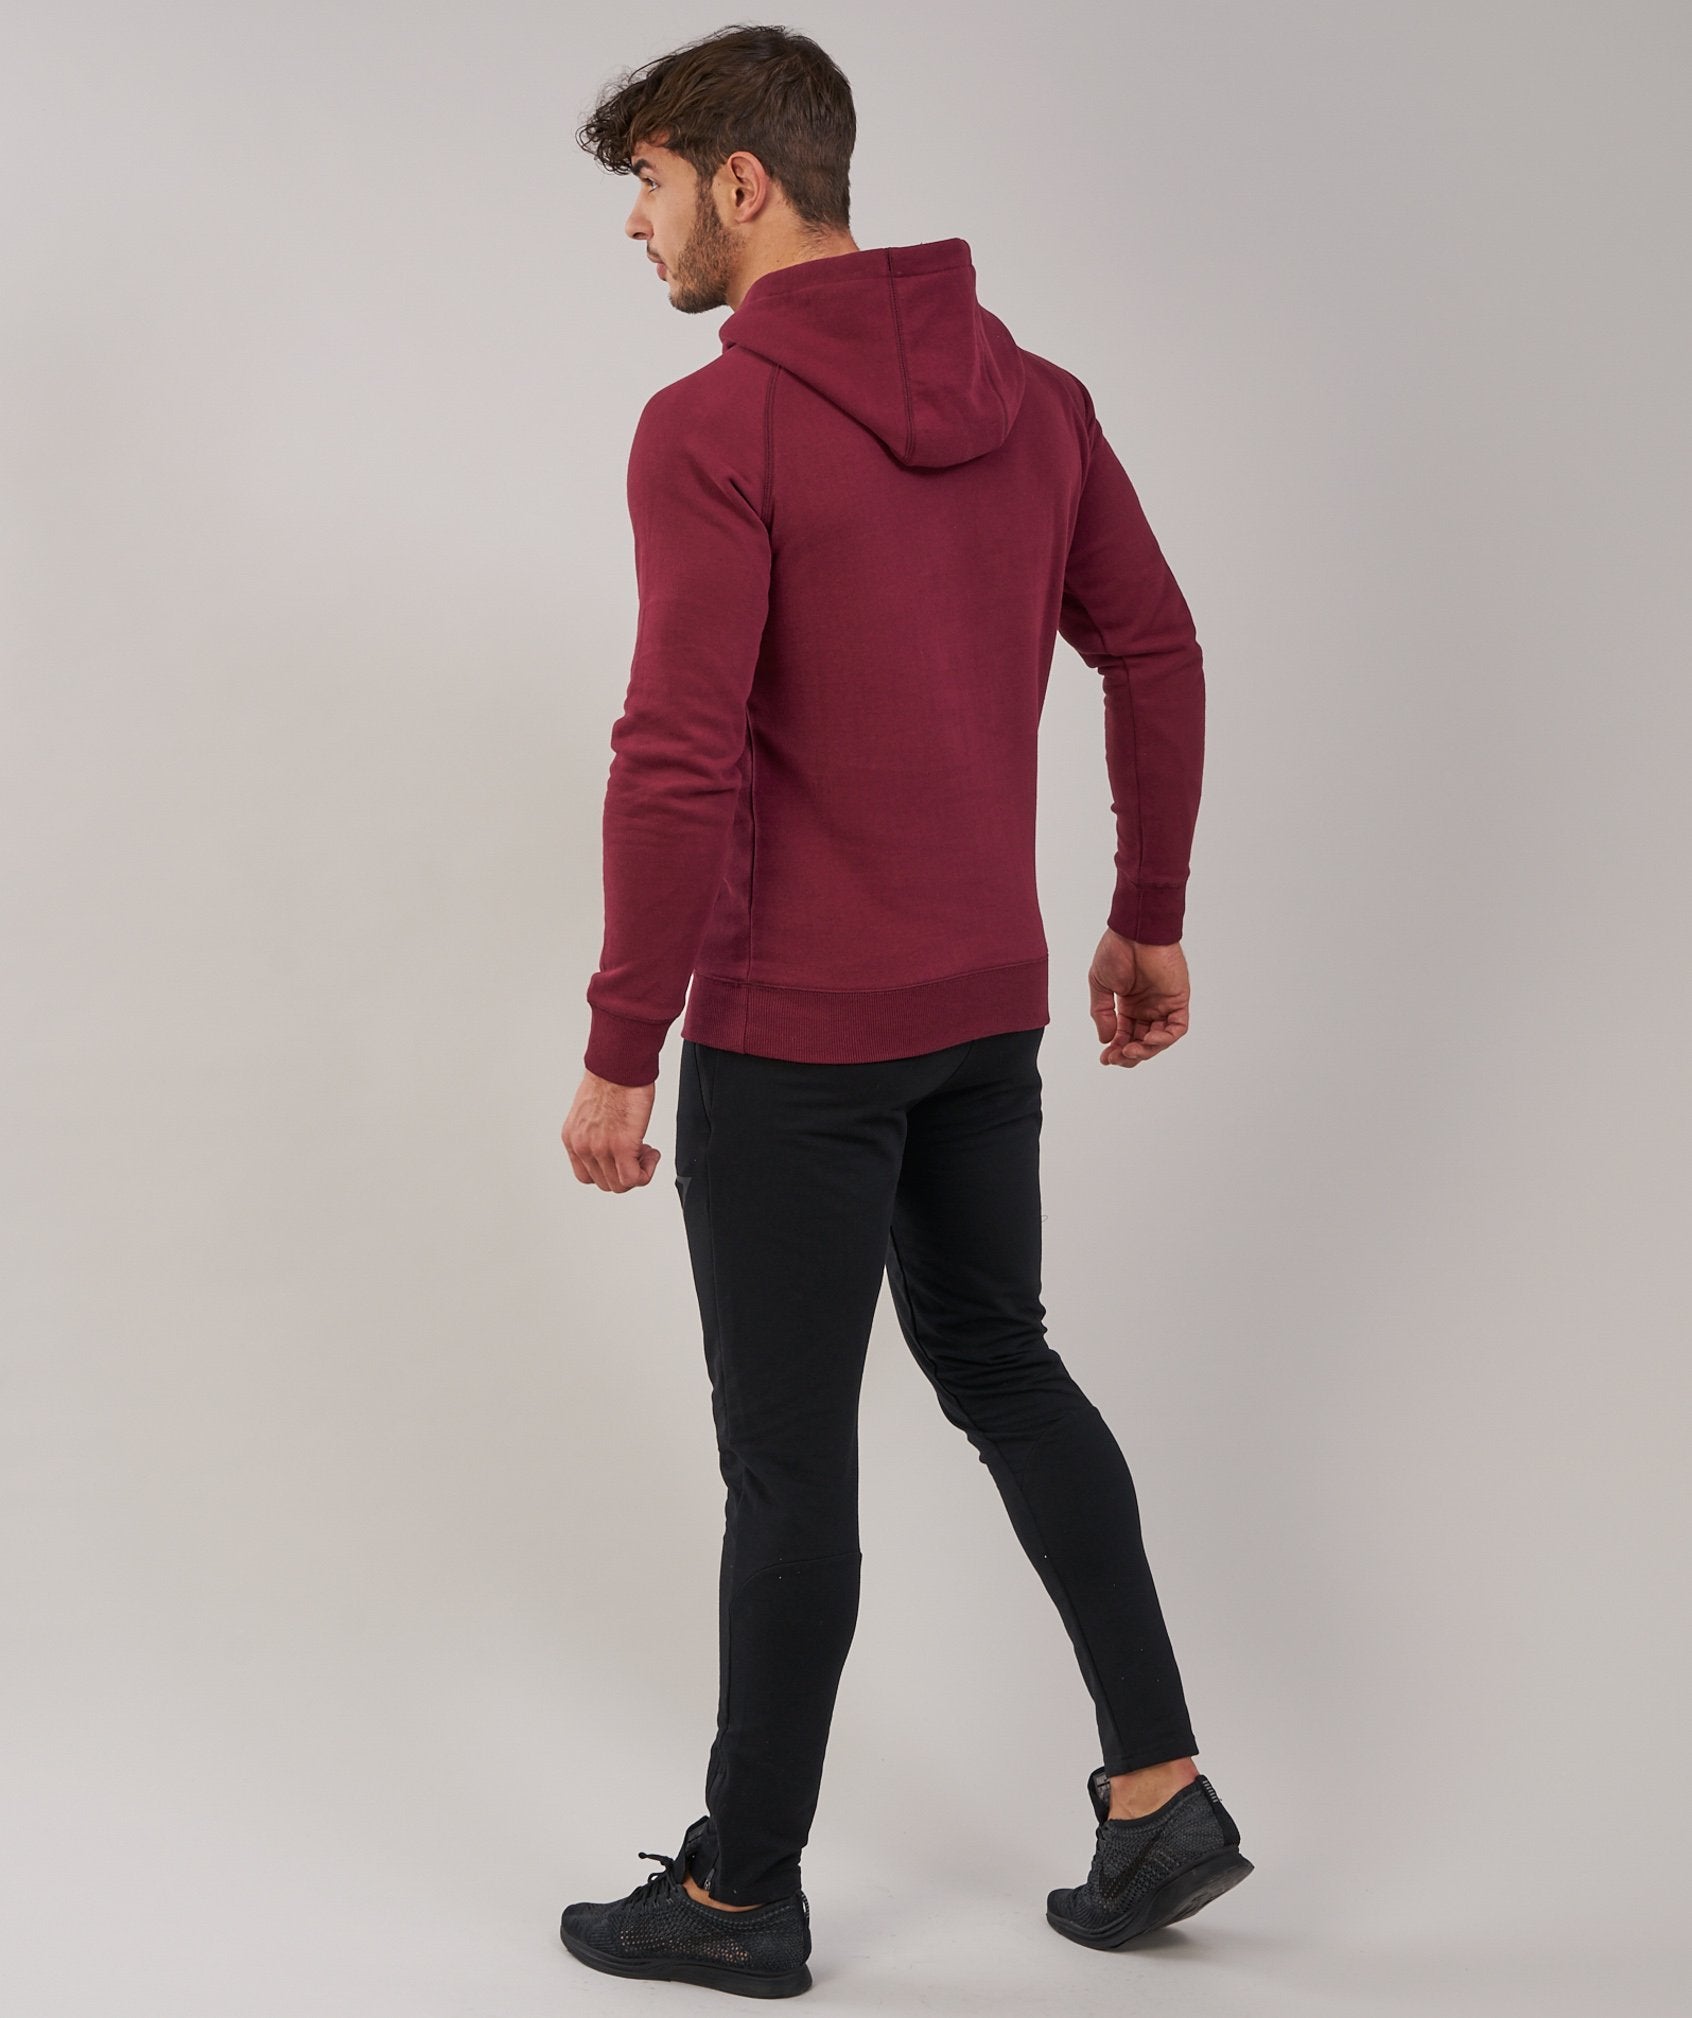 Fitness Hoodie in Port - view 4